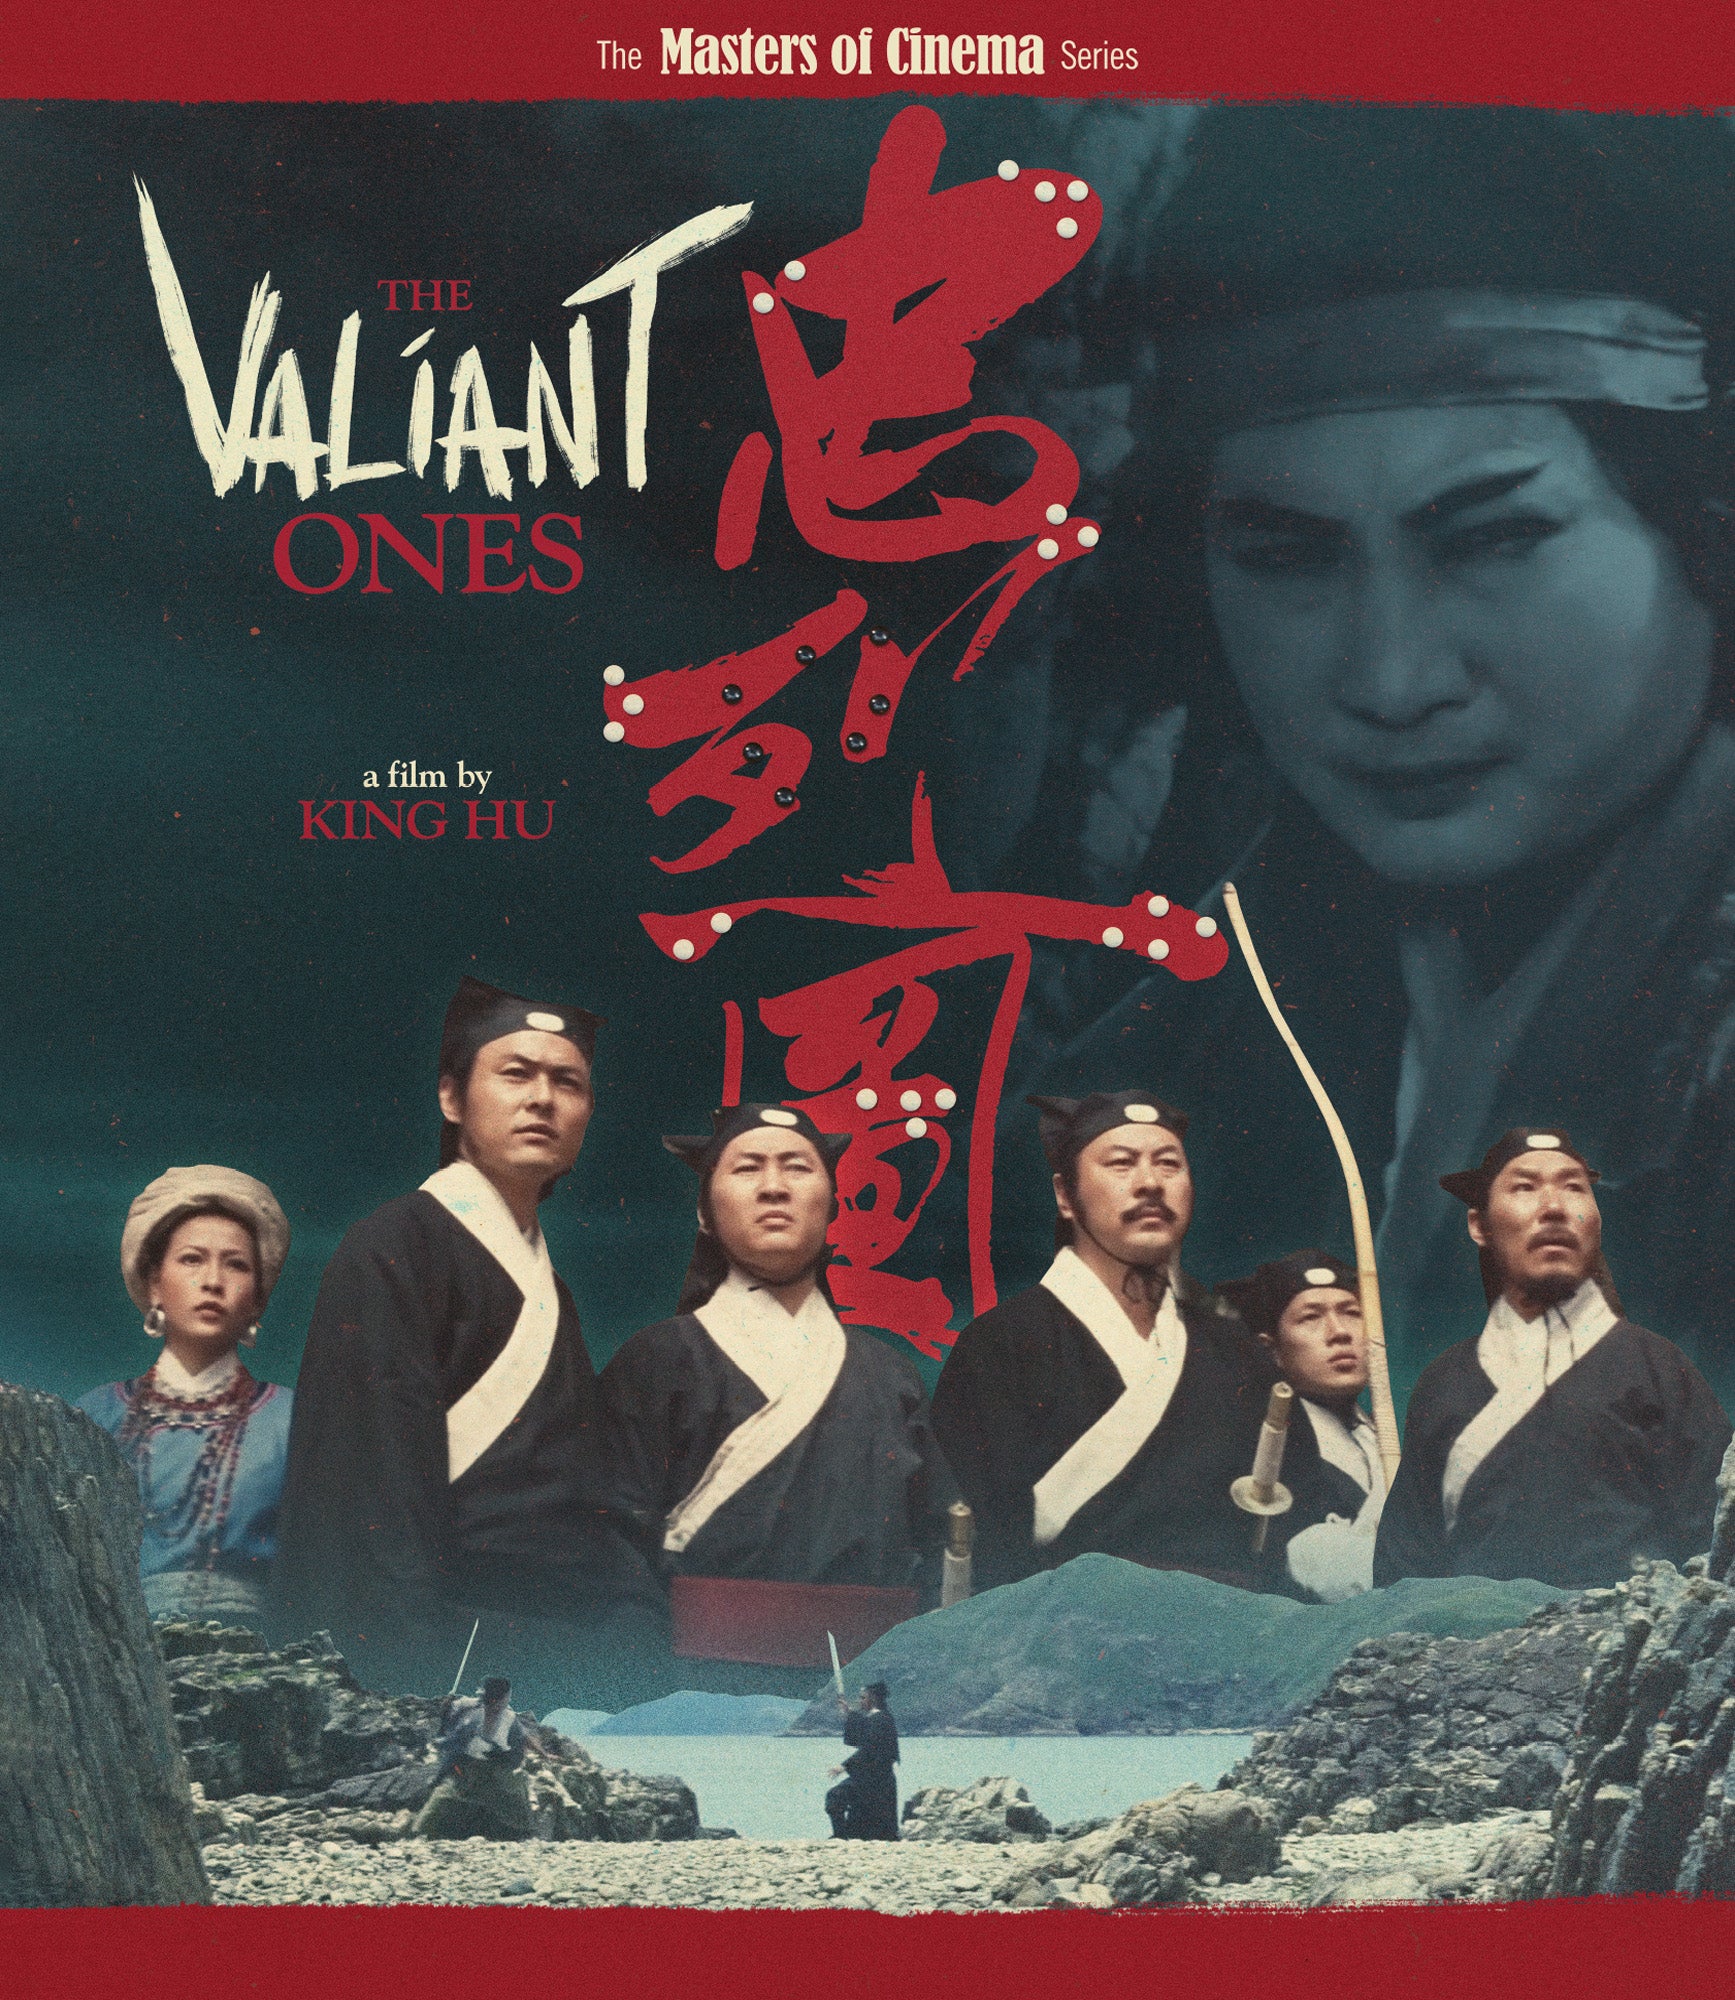 THE VALIANT ONES (LIMITED EDITION) 4K UHD [PRE-ORDER]